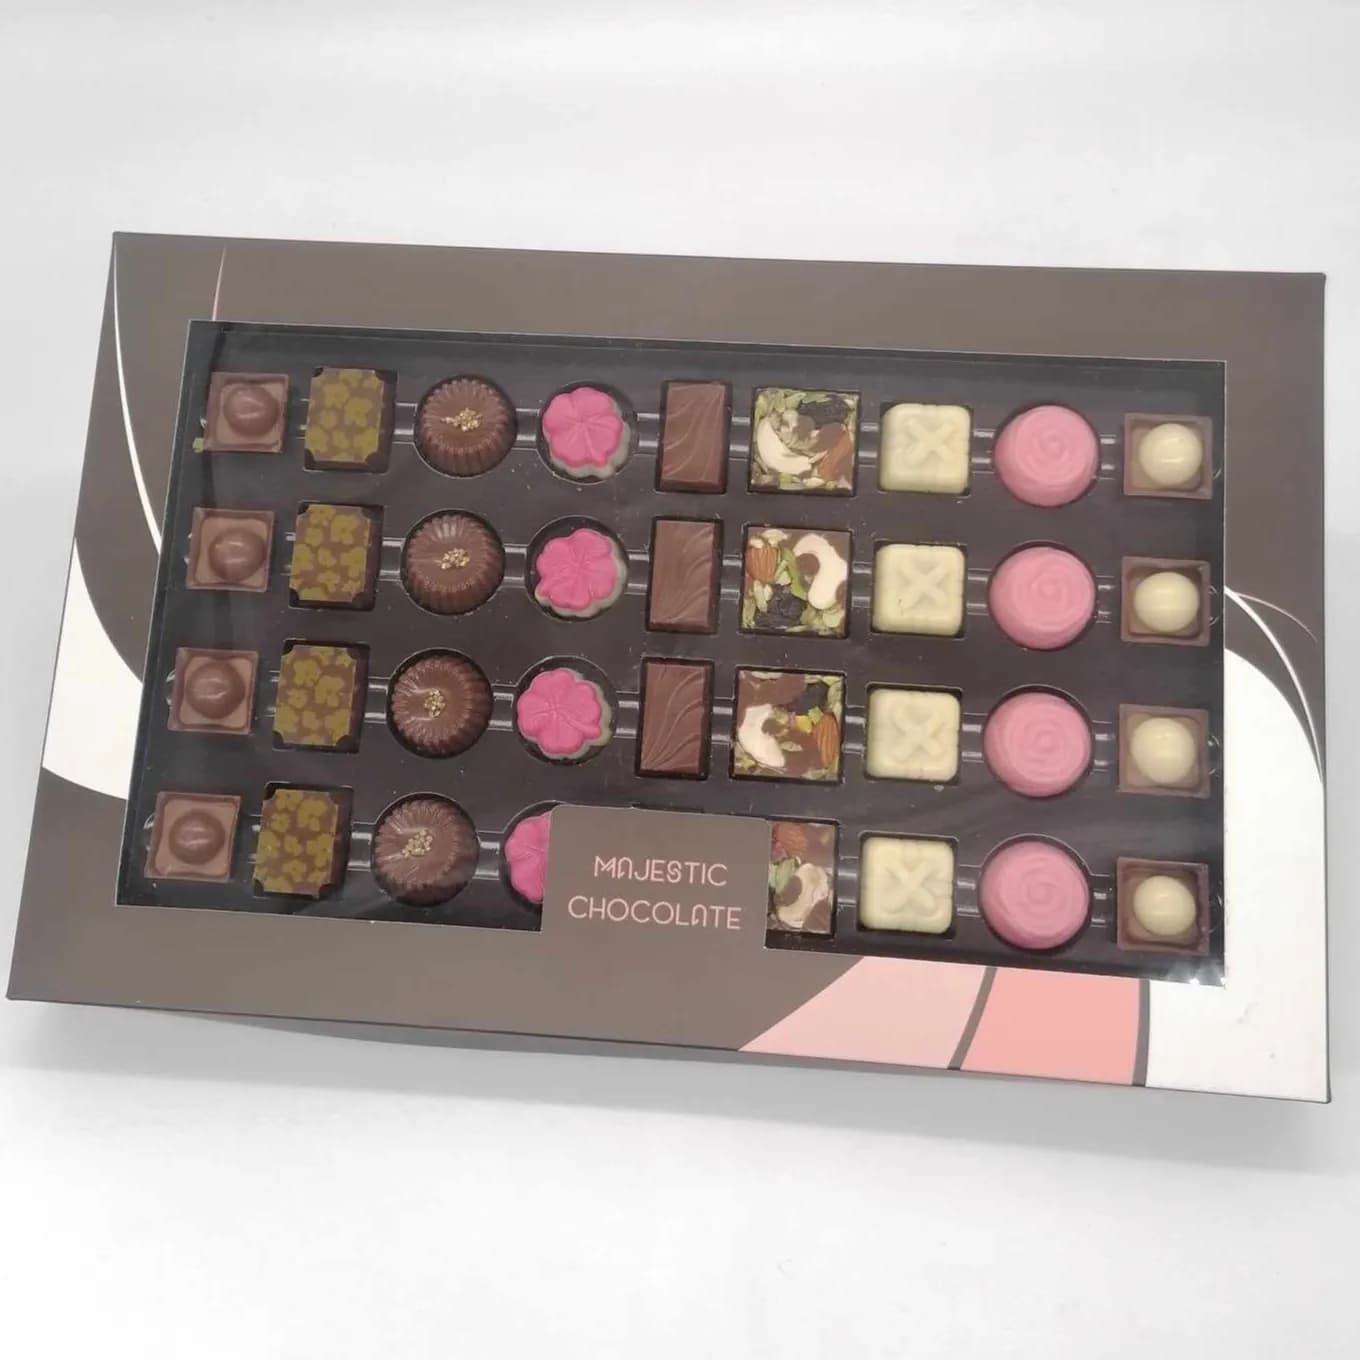 A Luxurious Chocolate Box Consisting Of A Chocolate Mix